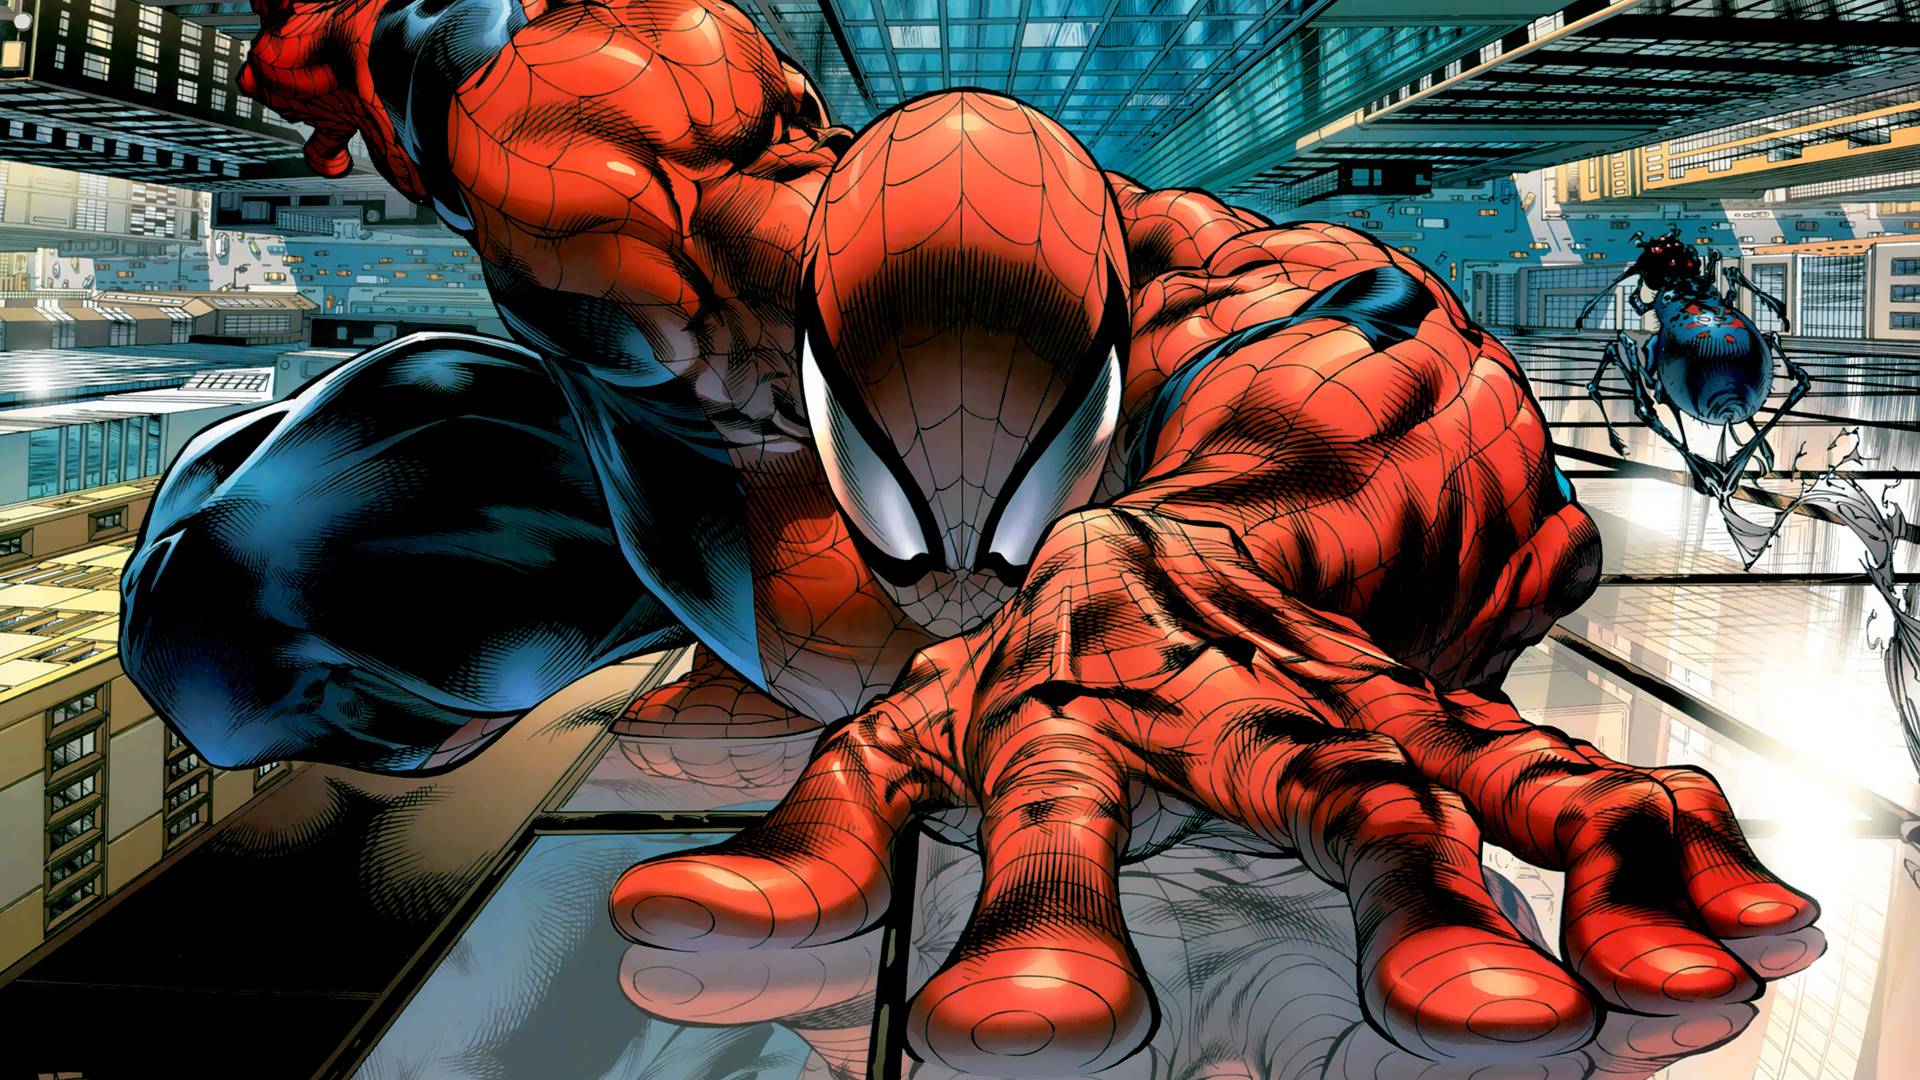 Amazing Spiderman 2K wallpapers from Marvel